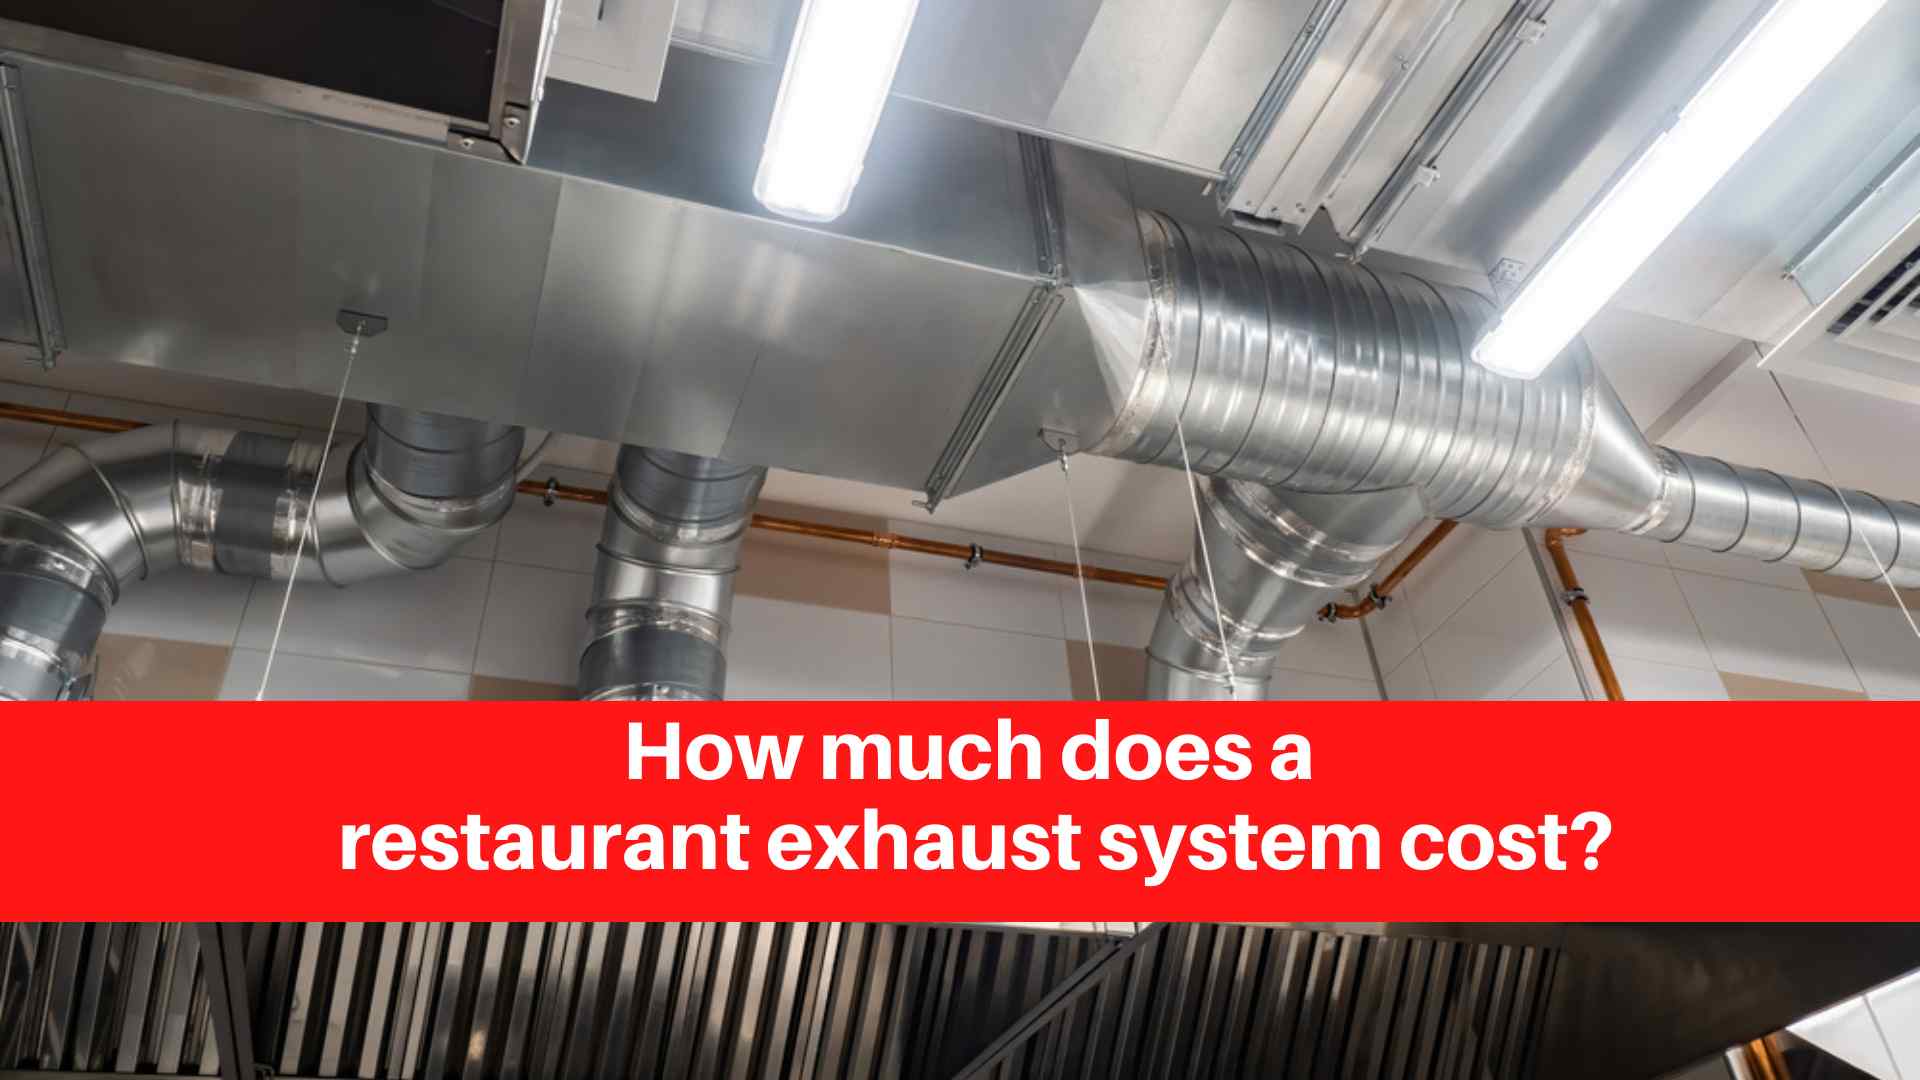 How much does a restaurant exhaust system cost